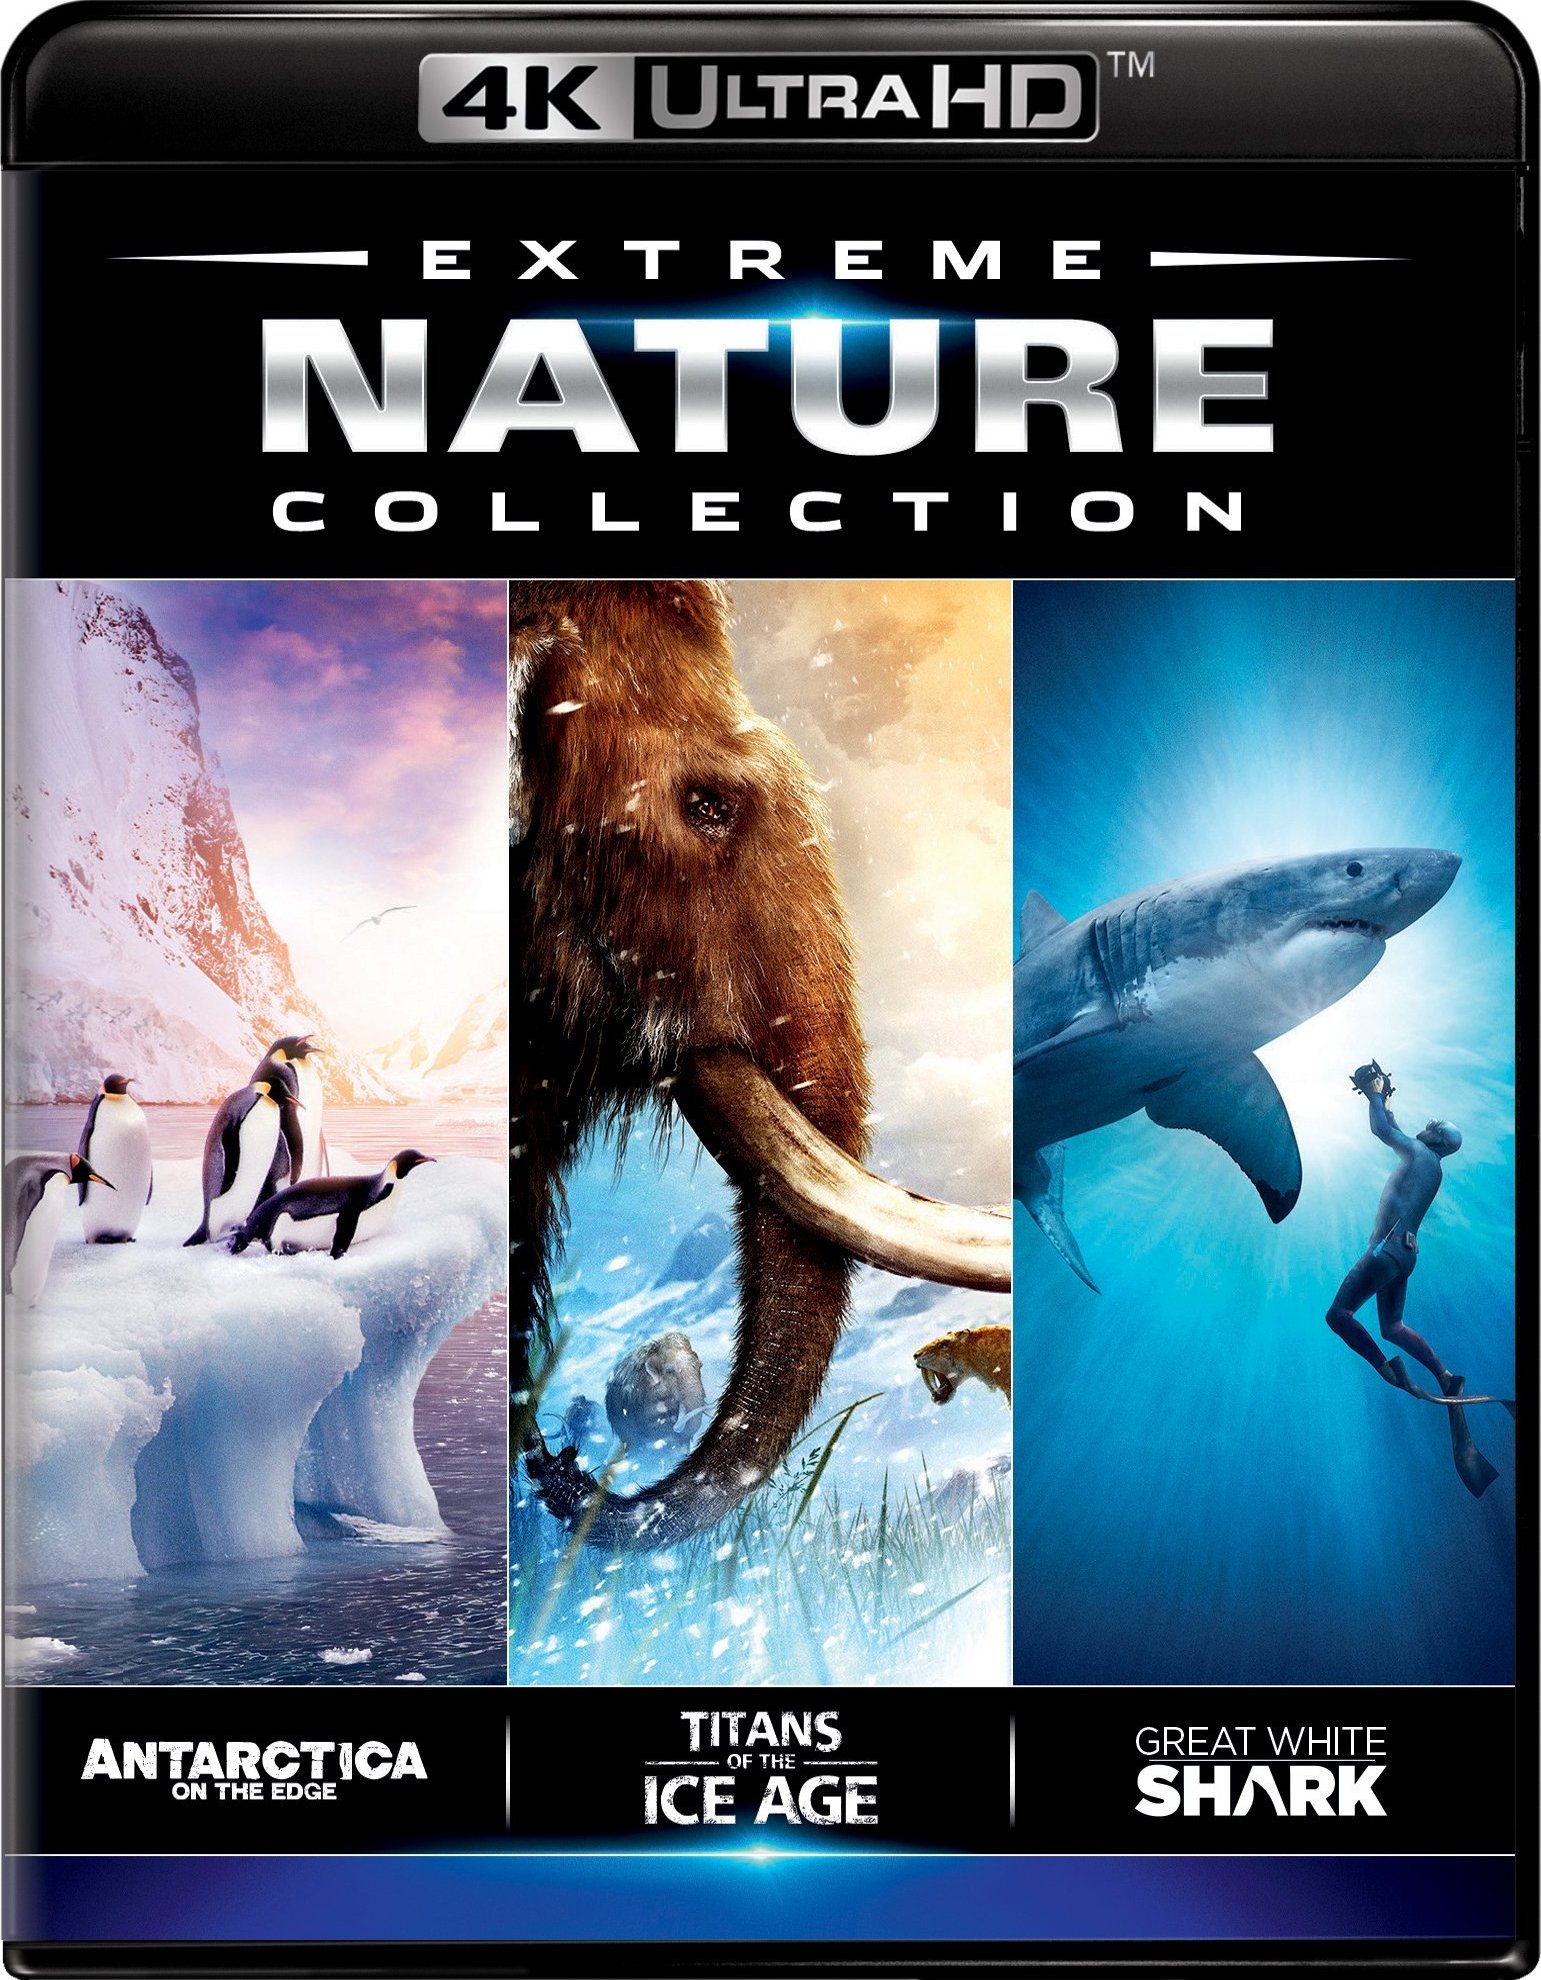 IMAX: Extreme Nature Collection 4K Ultra HD Blu-ray